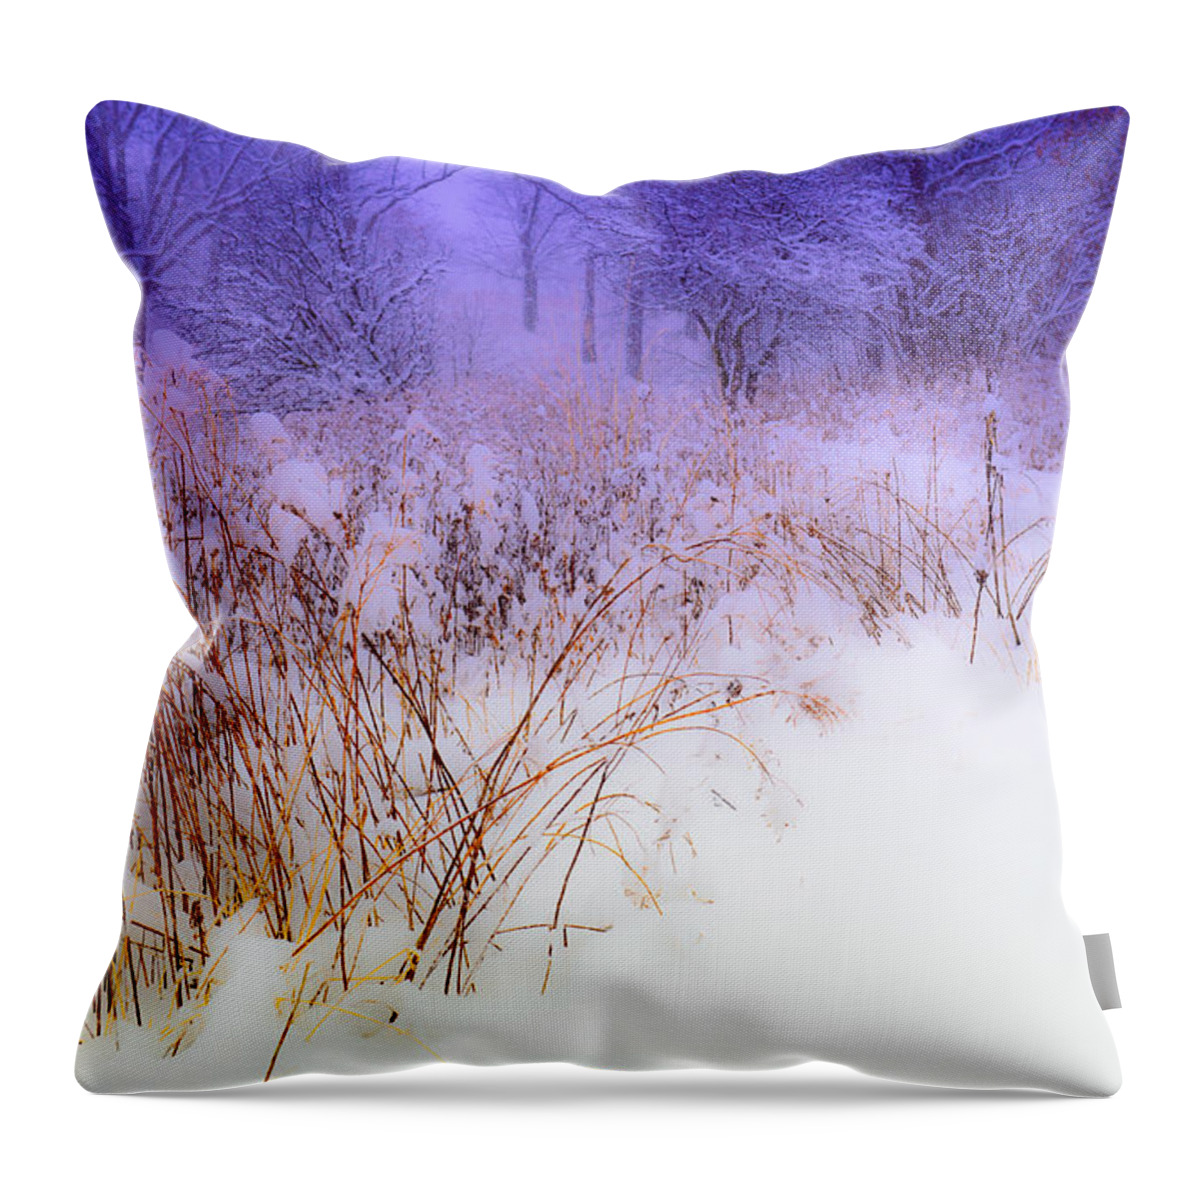 Winter Weeds Throw Pillow featuring the digital art Feel of Cold Land by Judith Barath